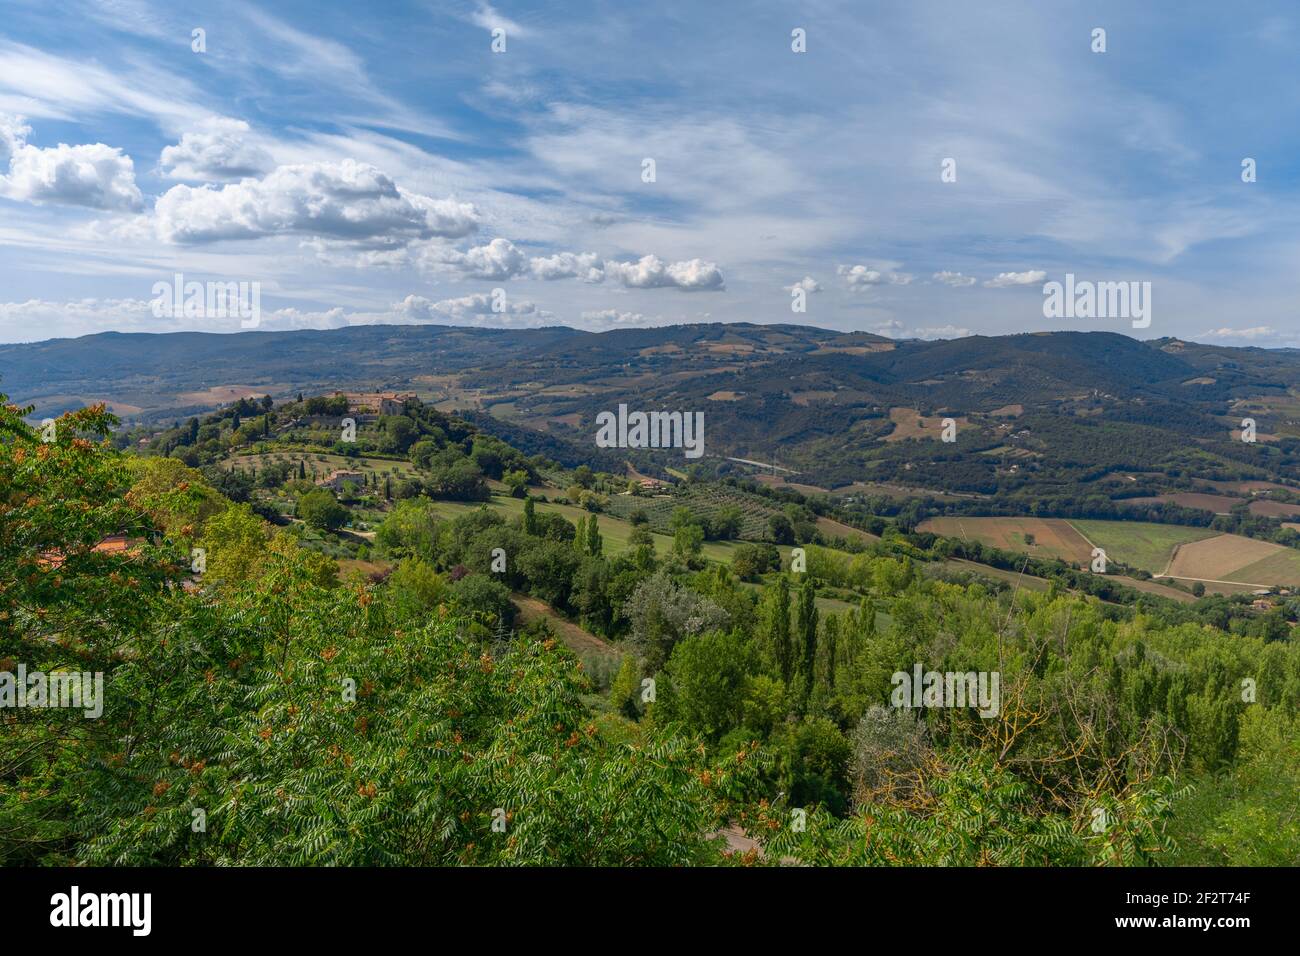 Beautiful panoramic view of the landscape near the city of Todi, Umbria, italy Stock Photo